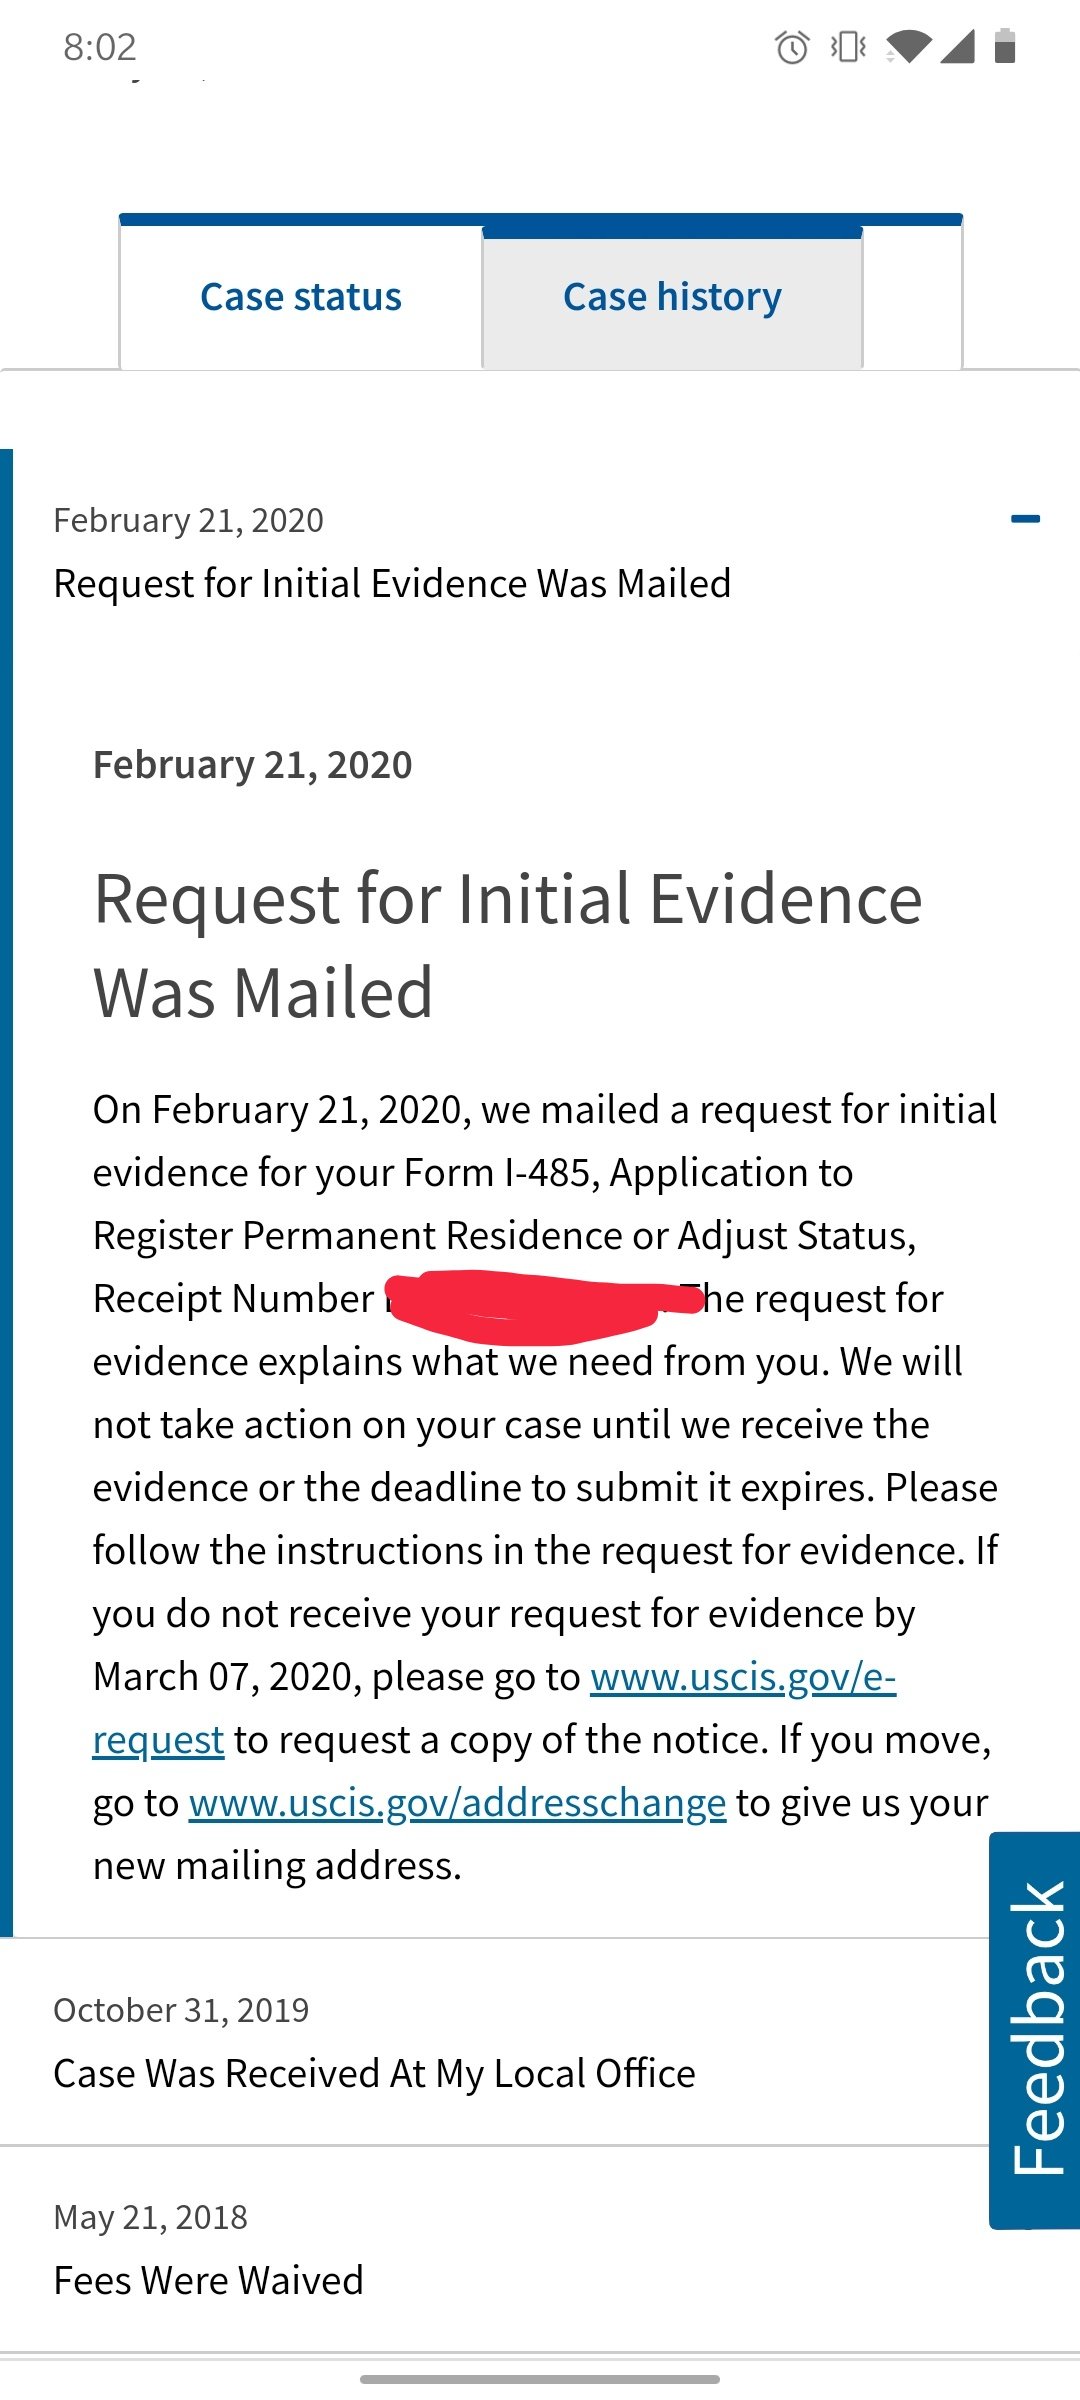 How to Respond to a USCIS Request for Evidence (RFE)